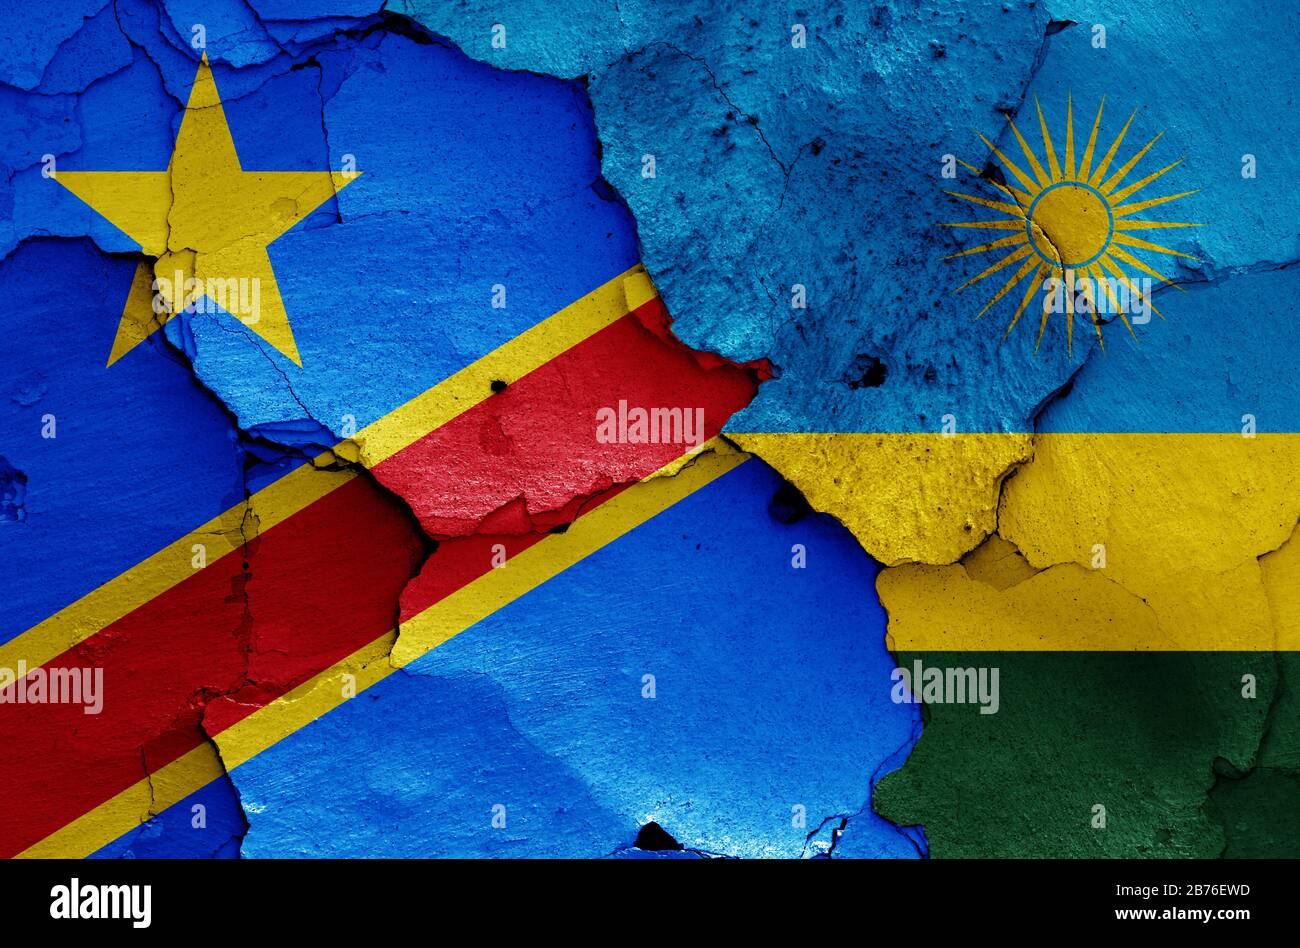 Flags Of Dr Congo And Rwanda Painted On Cracked Wall 2B76EWD 